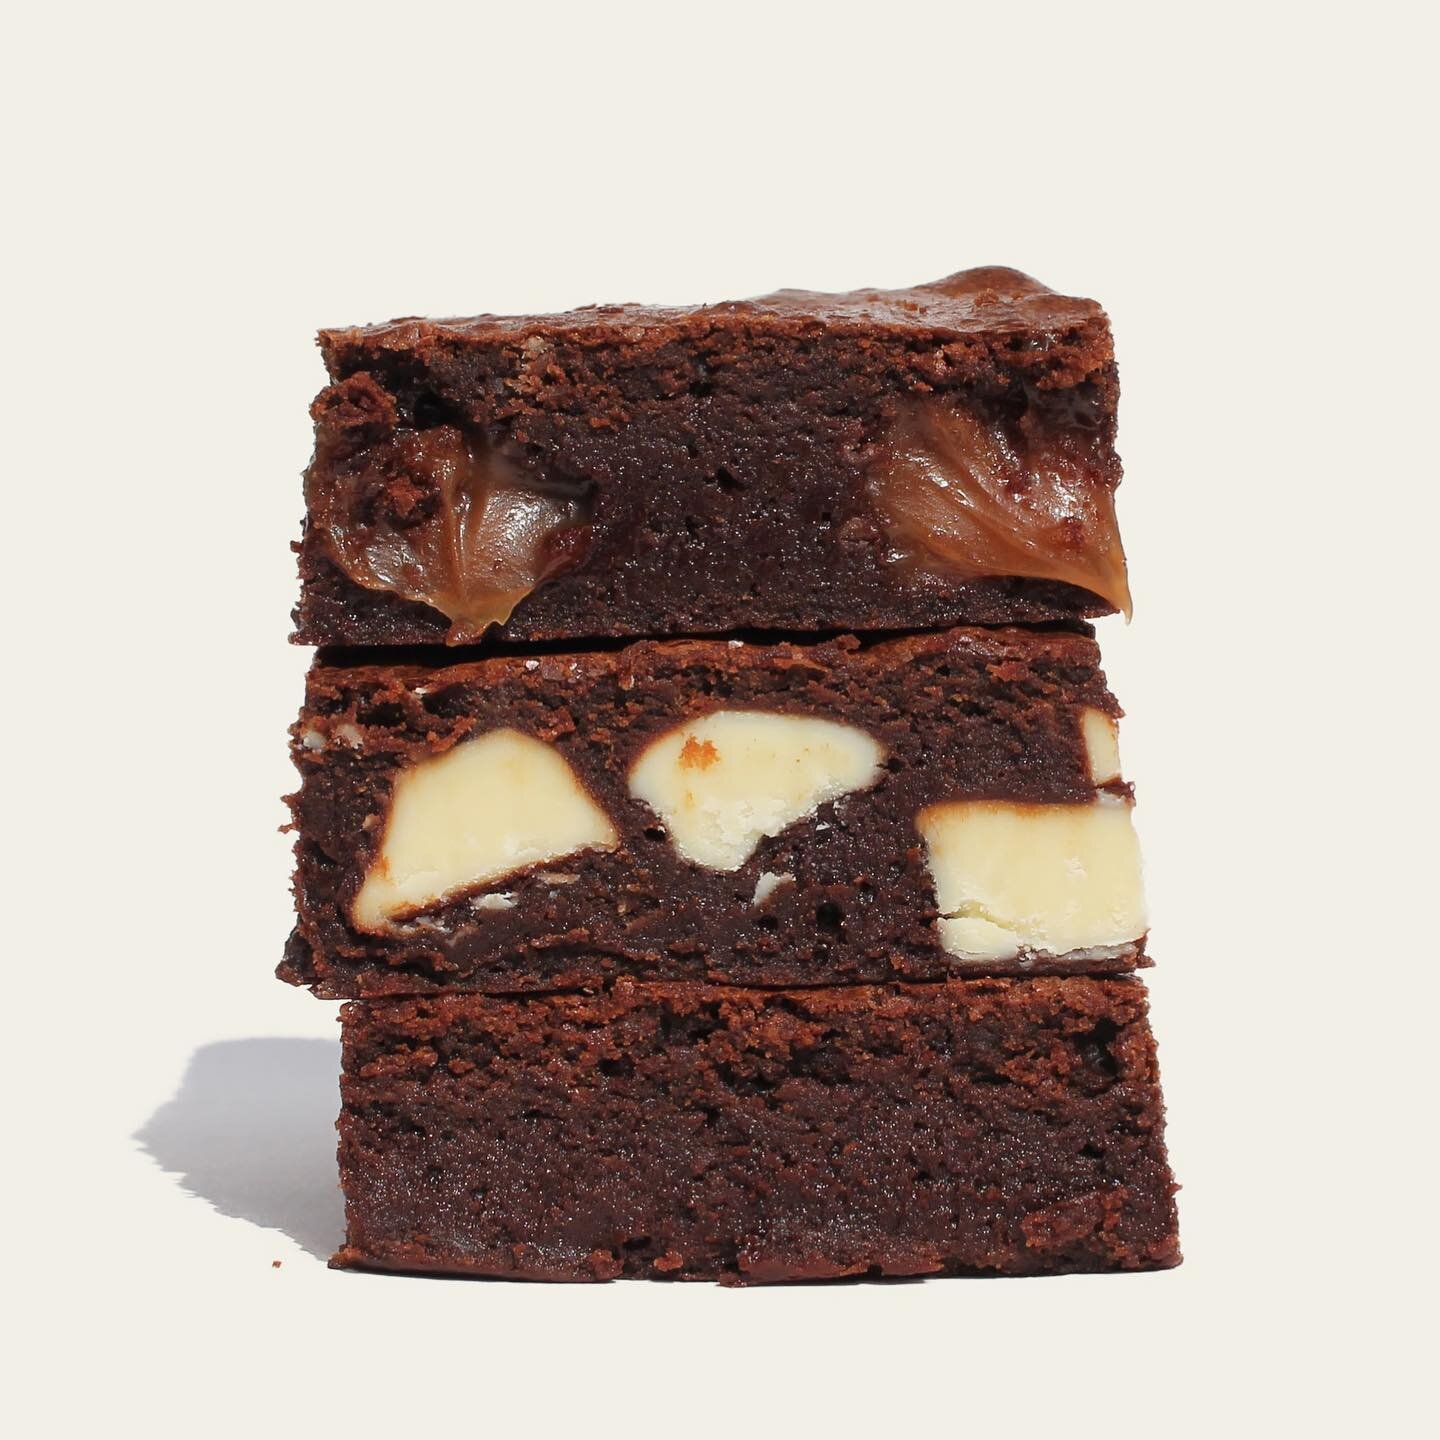 THE HOLY TRINITY ❕
We&rsquo;ve updated our website and you can find a couple new thingsssss on there like this mixed brownie box - our OG white chocolate, our new salted caramel brownie and our rich chocolate brownie can all be yours, shop at the lin